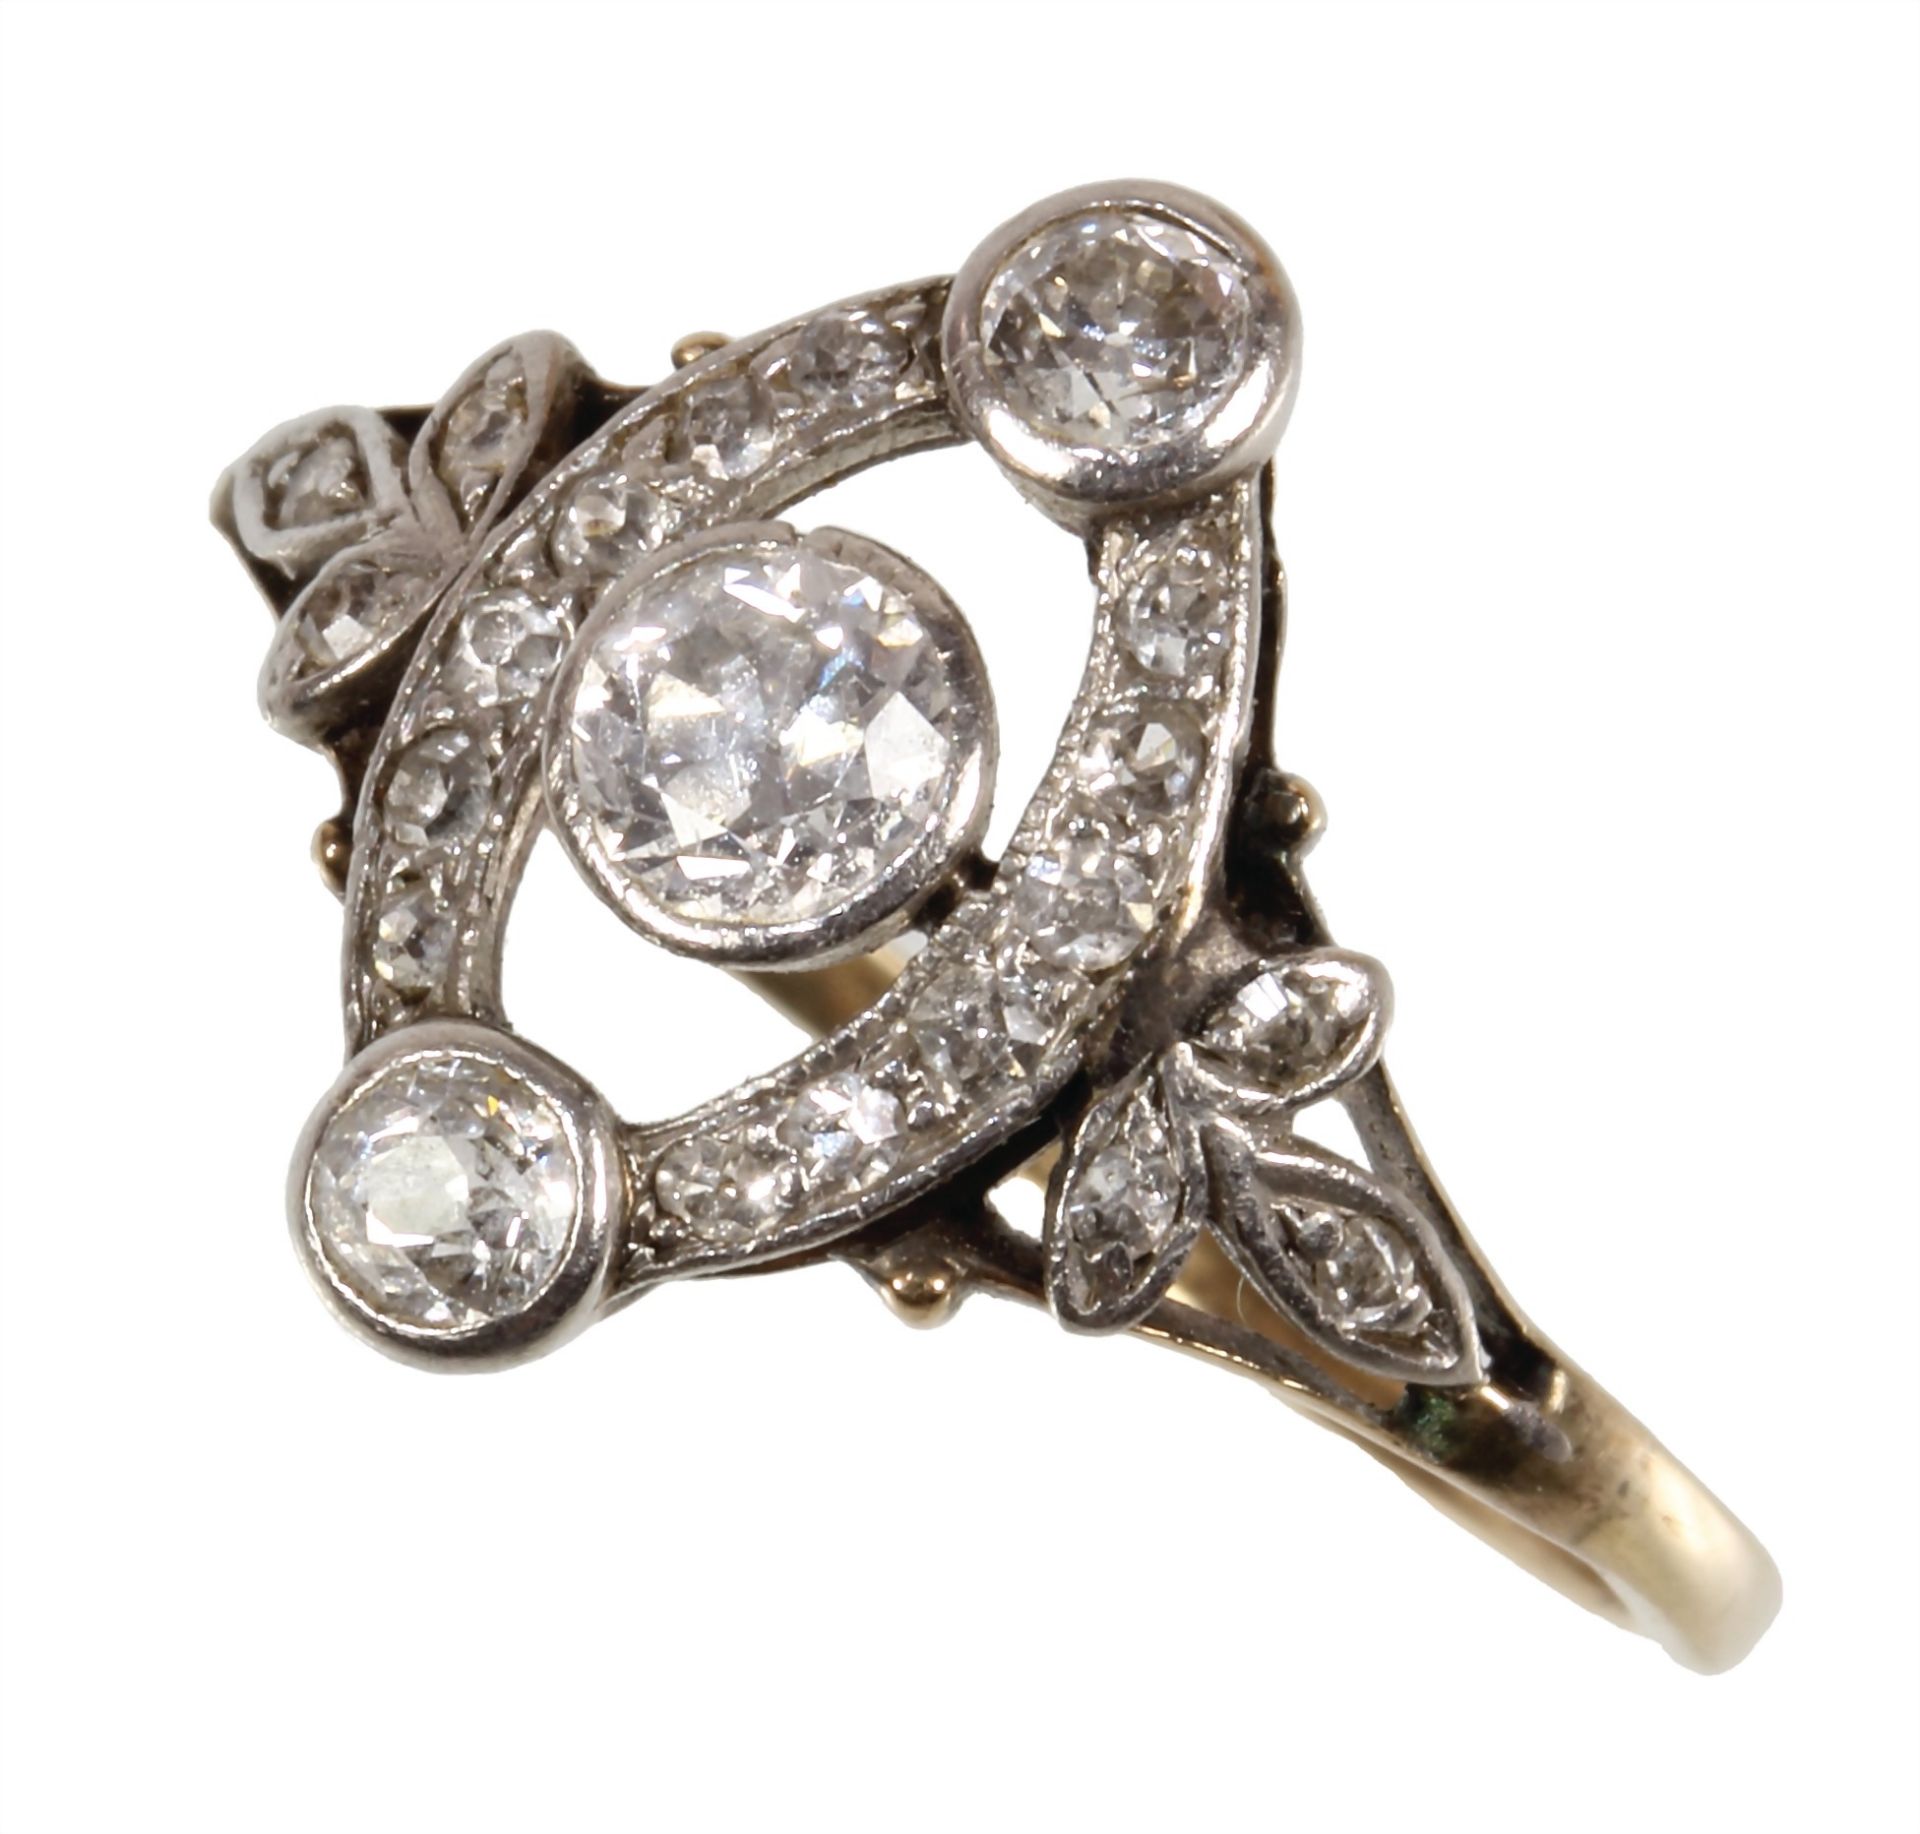 ring, ART-DECO 1920/'30s, yellow gold 585/000, central old cut-diamond c. 0.26 ct white ... - Image 2 of 3